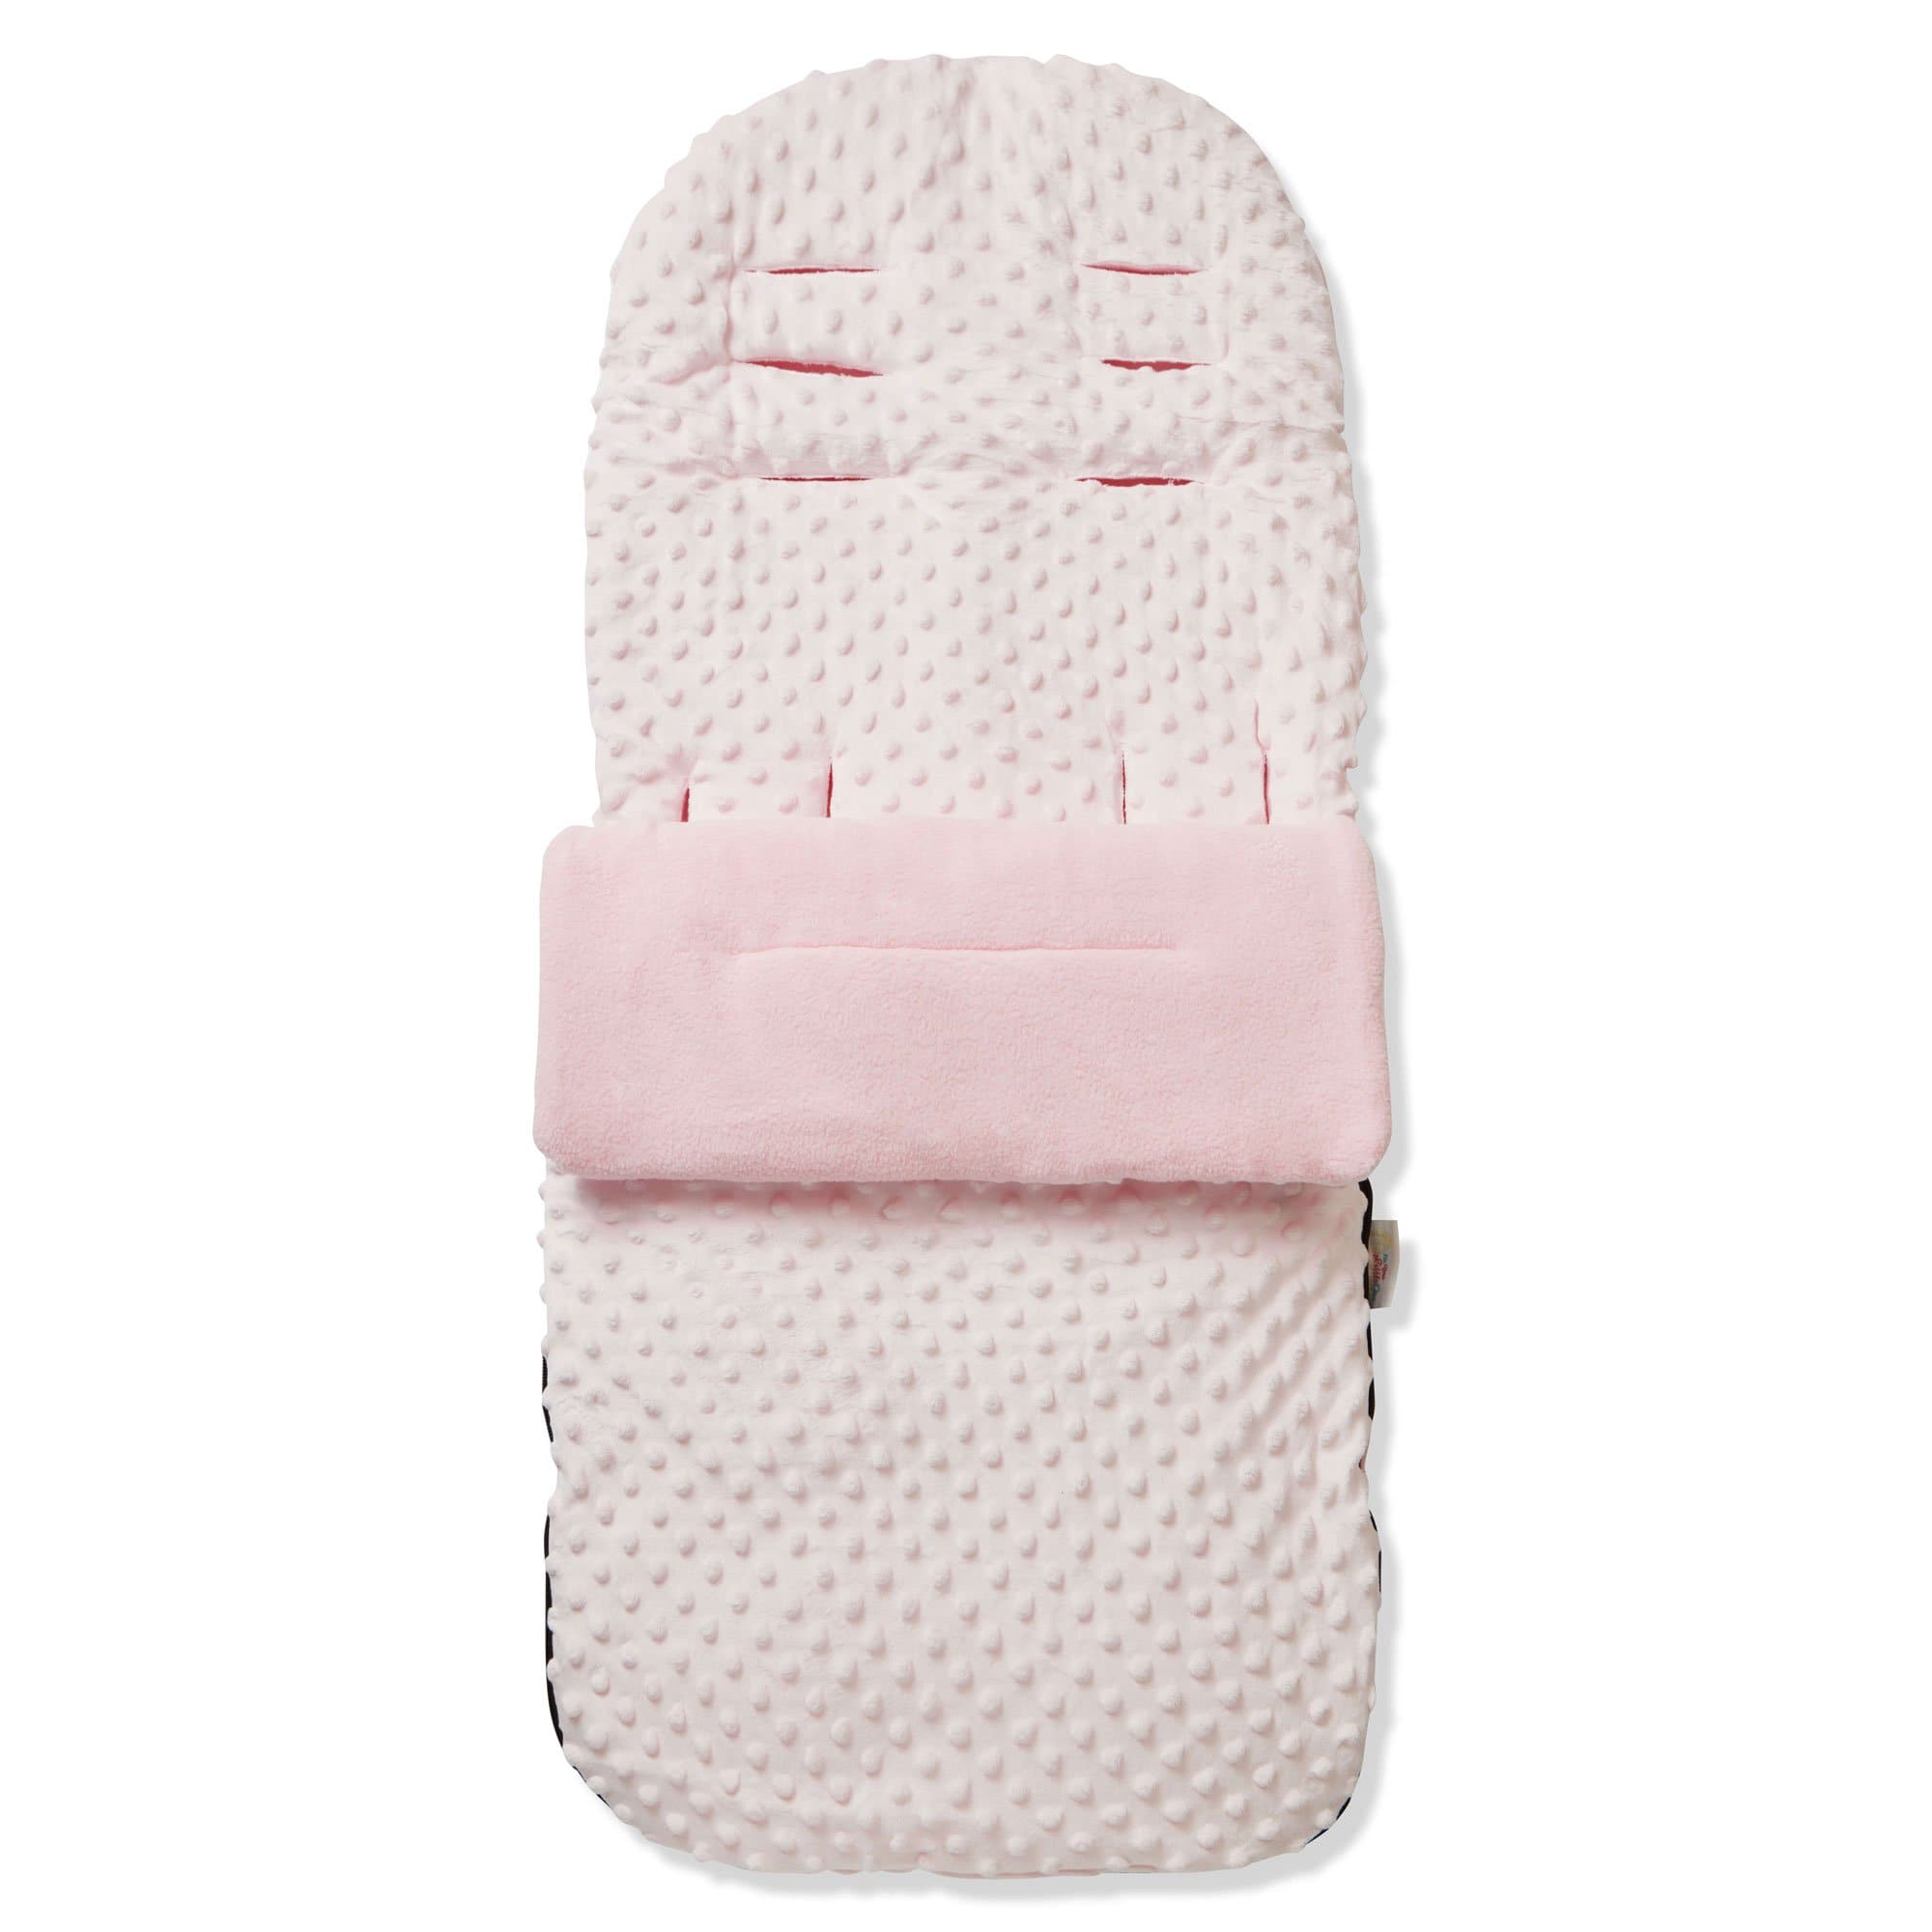 Dimple Footmuff / Cosy Toes Compatible with Brio - For Your Little One